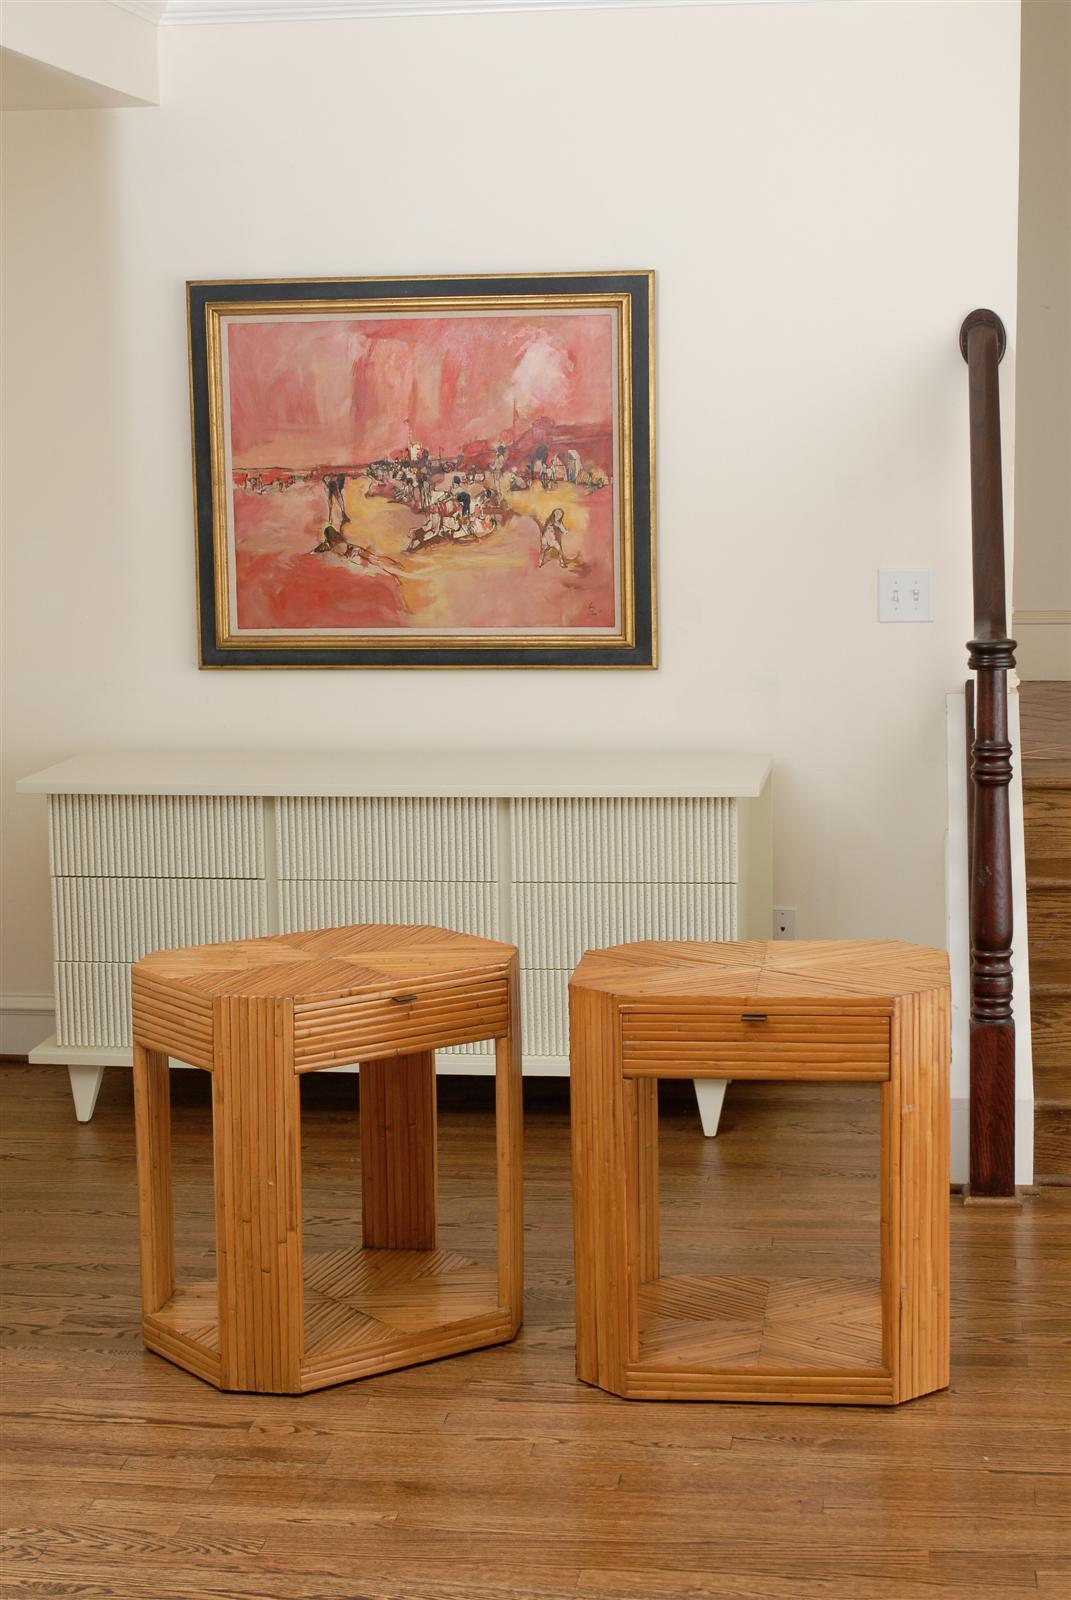 A stellar pair of vintage split bamboo end tables or nightstands. Individual bamboo pieces veneered over solid mahogany construction. Diagonally applied in sections at the tabletop and bottom creating a dramatic X effect. Absolutely beautiful